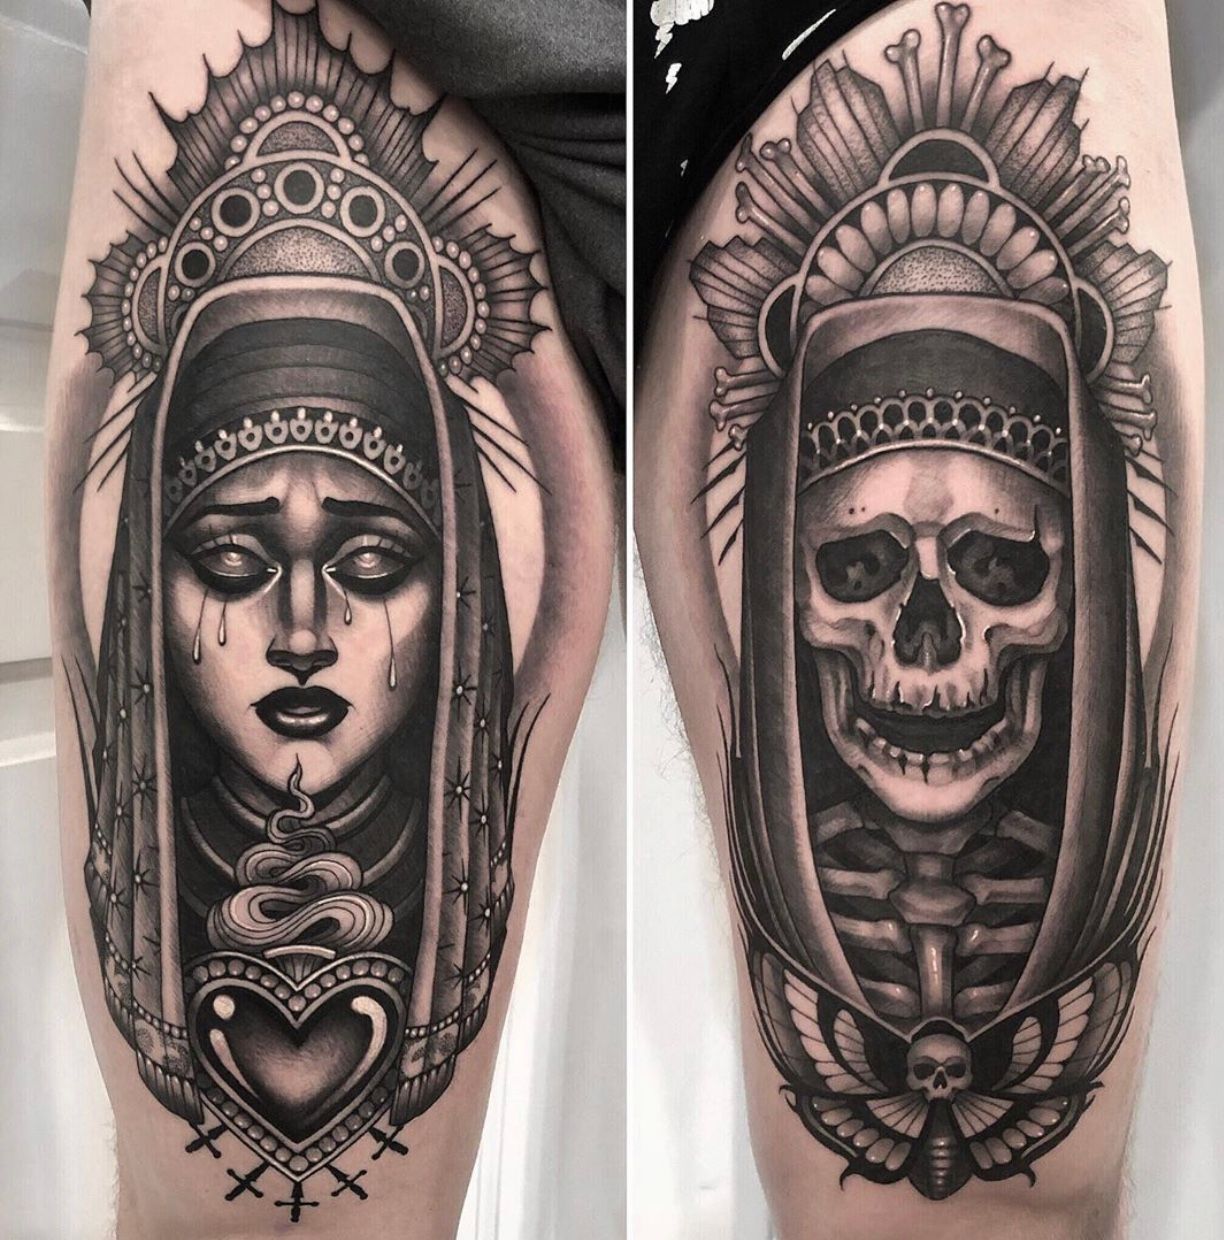 Tattoo uploaded by Tattoodo  Virgin Mary Death Cathedral tattoo by Ben  Thomas BenThomas besttattoos blackandgrey realism realistic  hyperrealism cathedral virginmary skeleton skull church stainedglass  tattoooftheday  Tattoodo